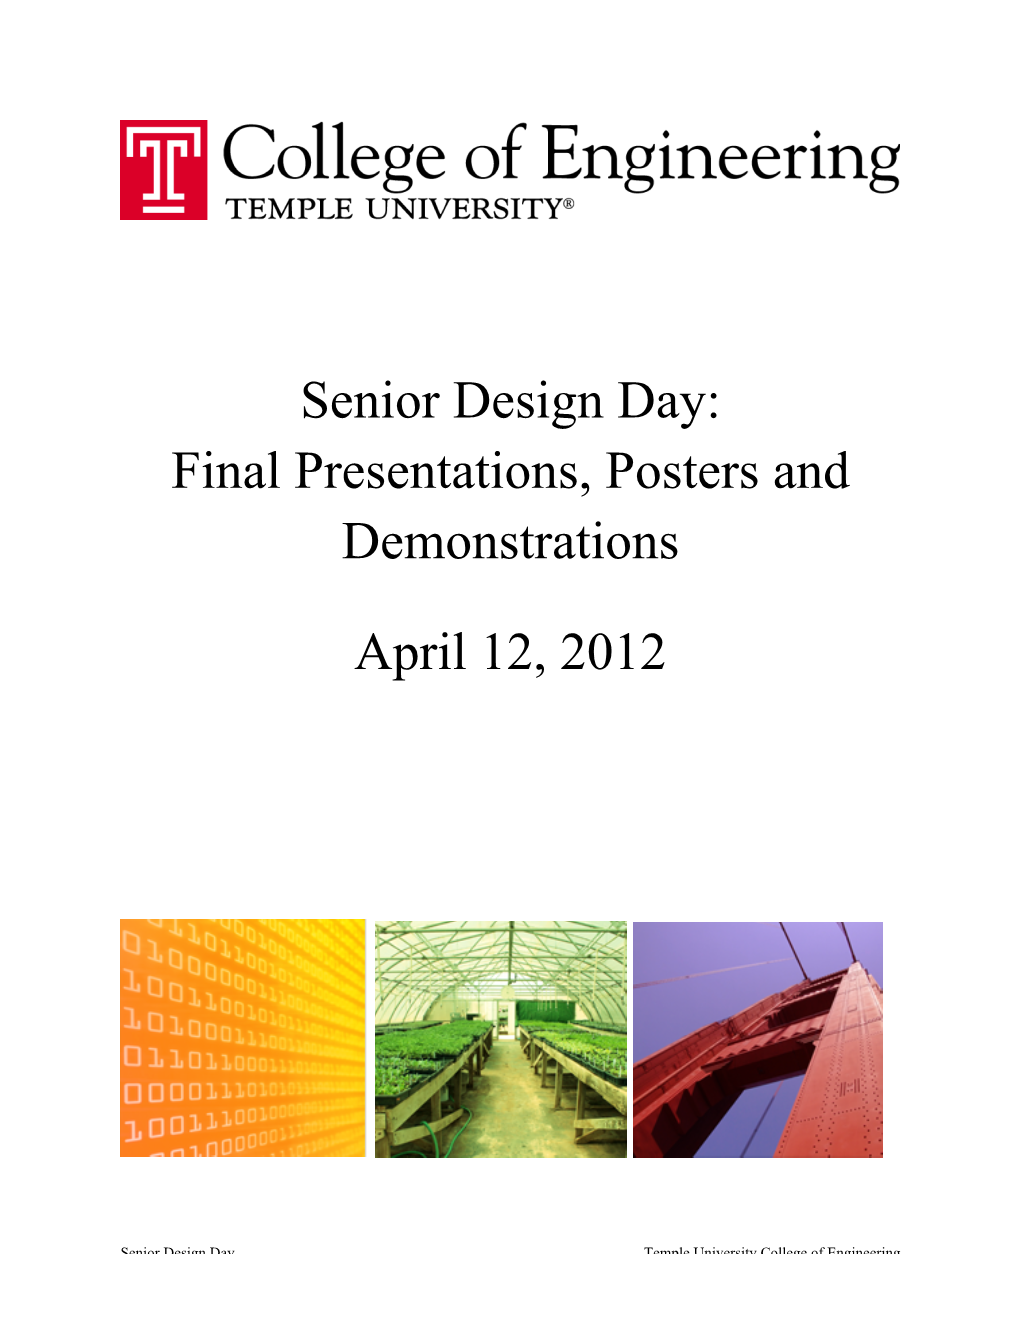 Final Presentations, Posters and Demonstrations April 12, 2012